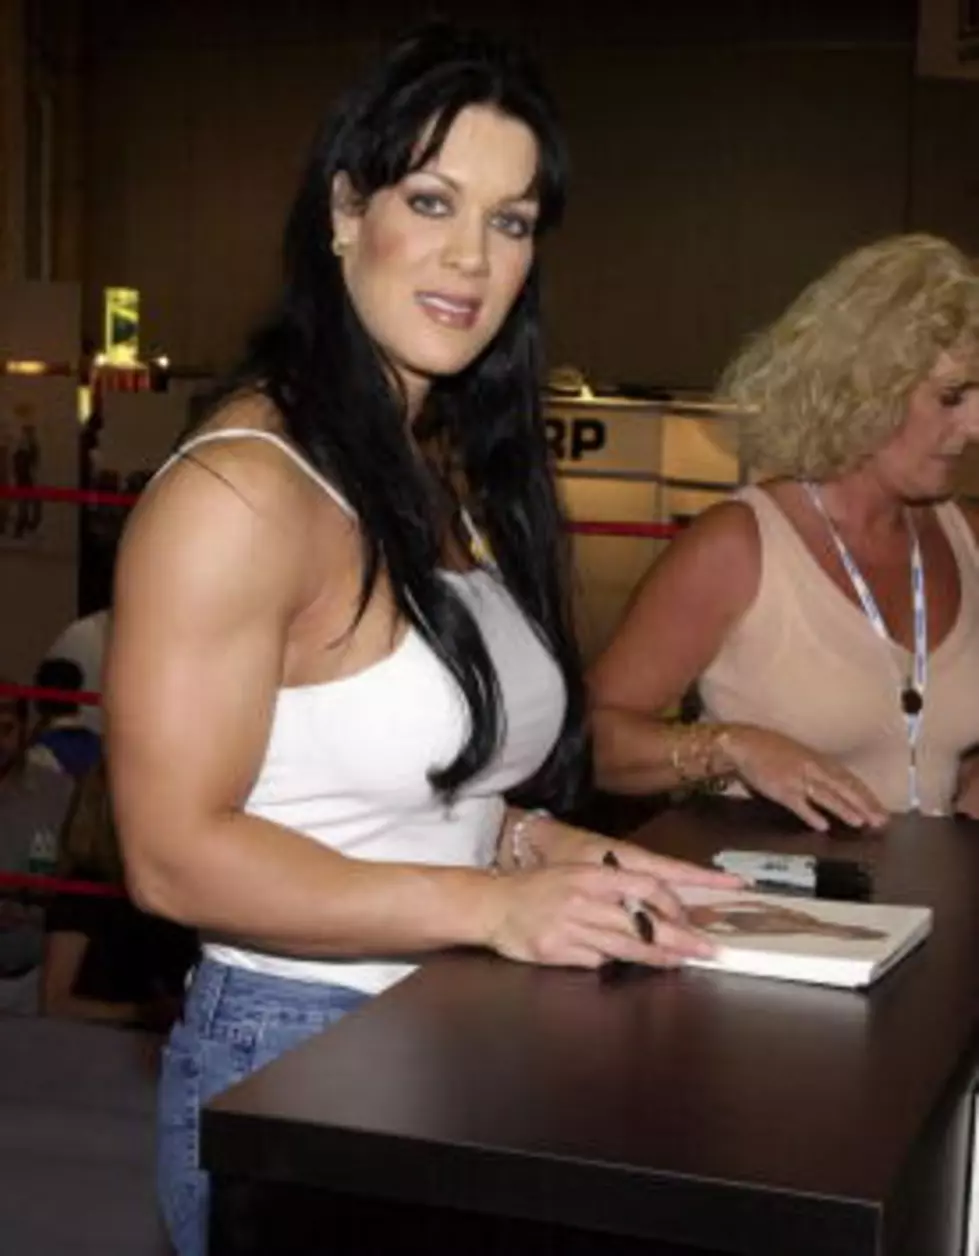 REMEMBERING CHYNA